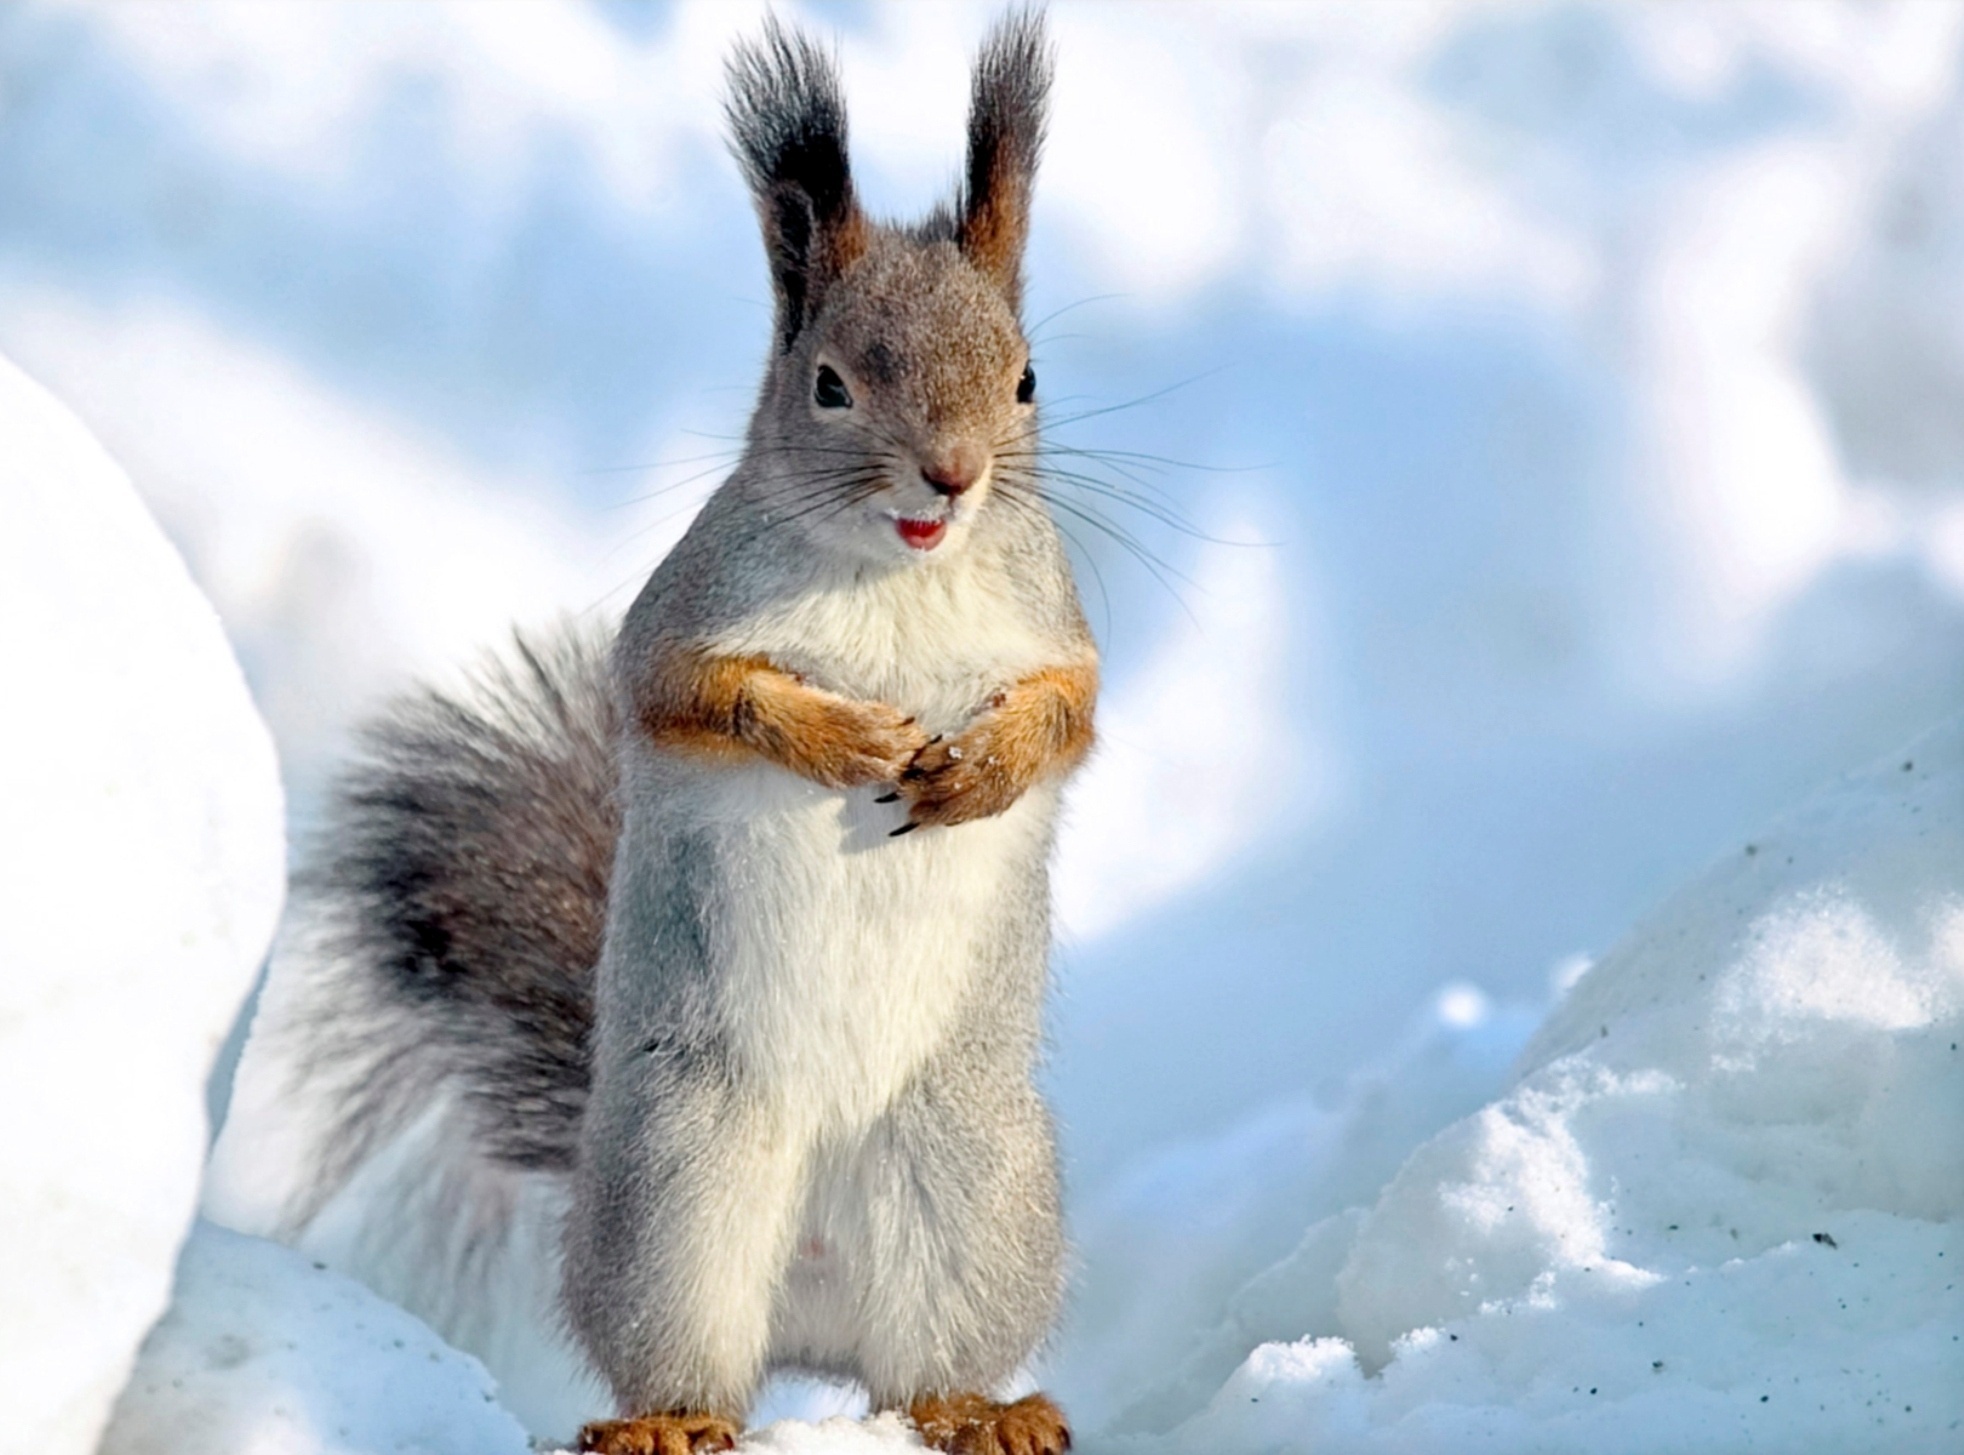 83861 download wallpaper animal, animals, winter, squirrel, snow screensavers and pictures for free